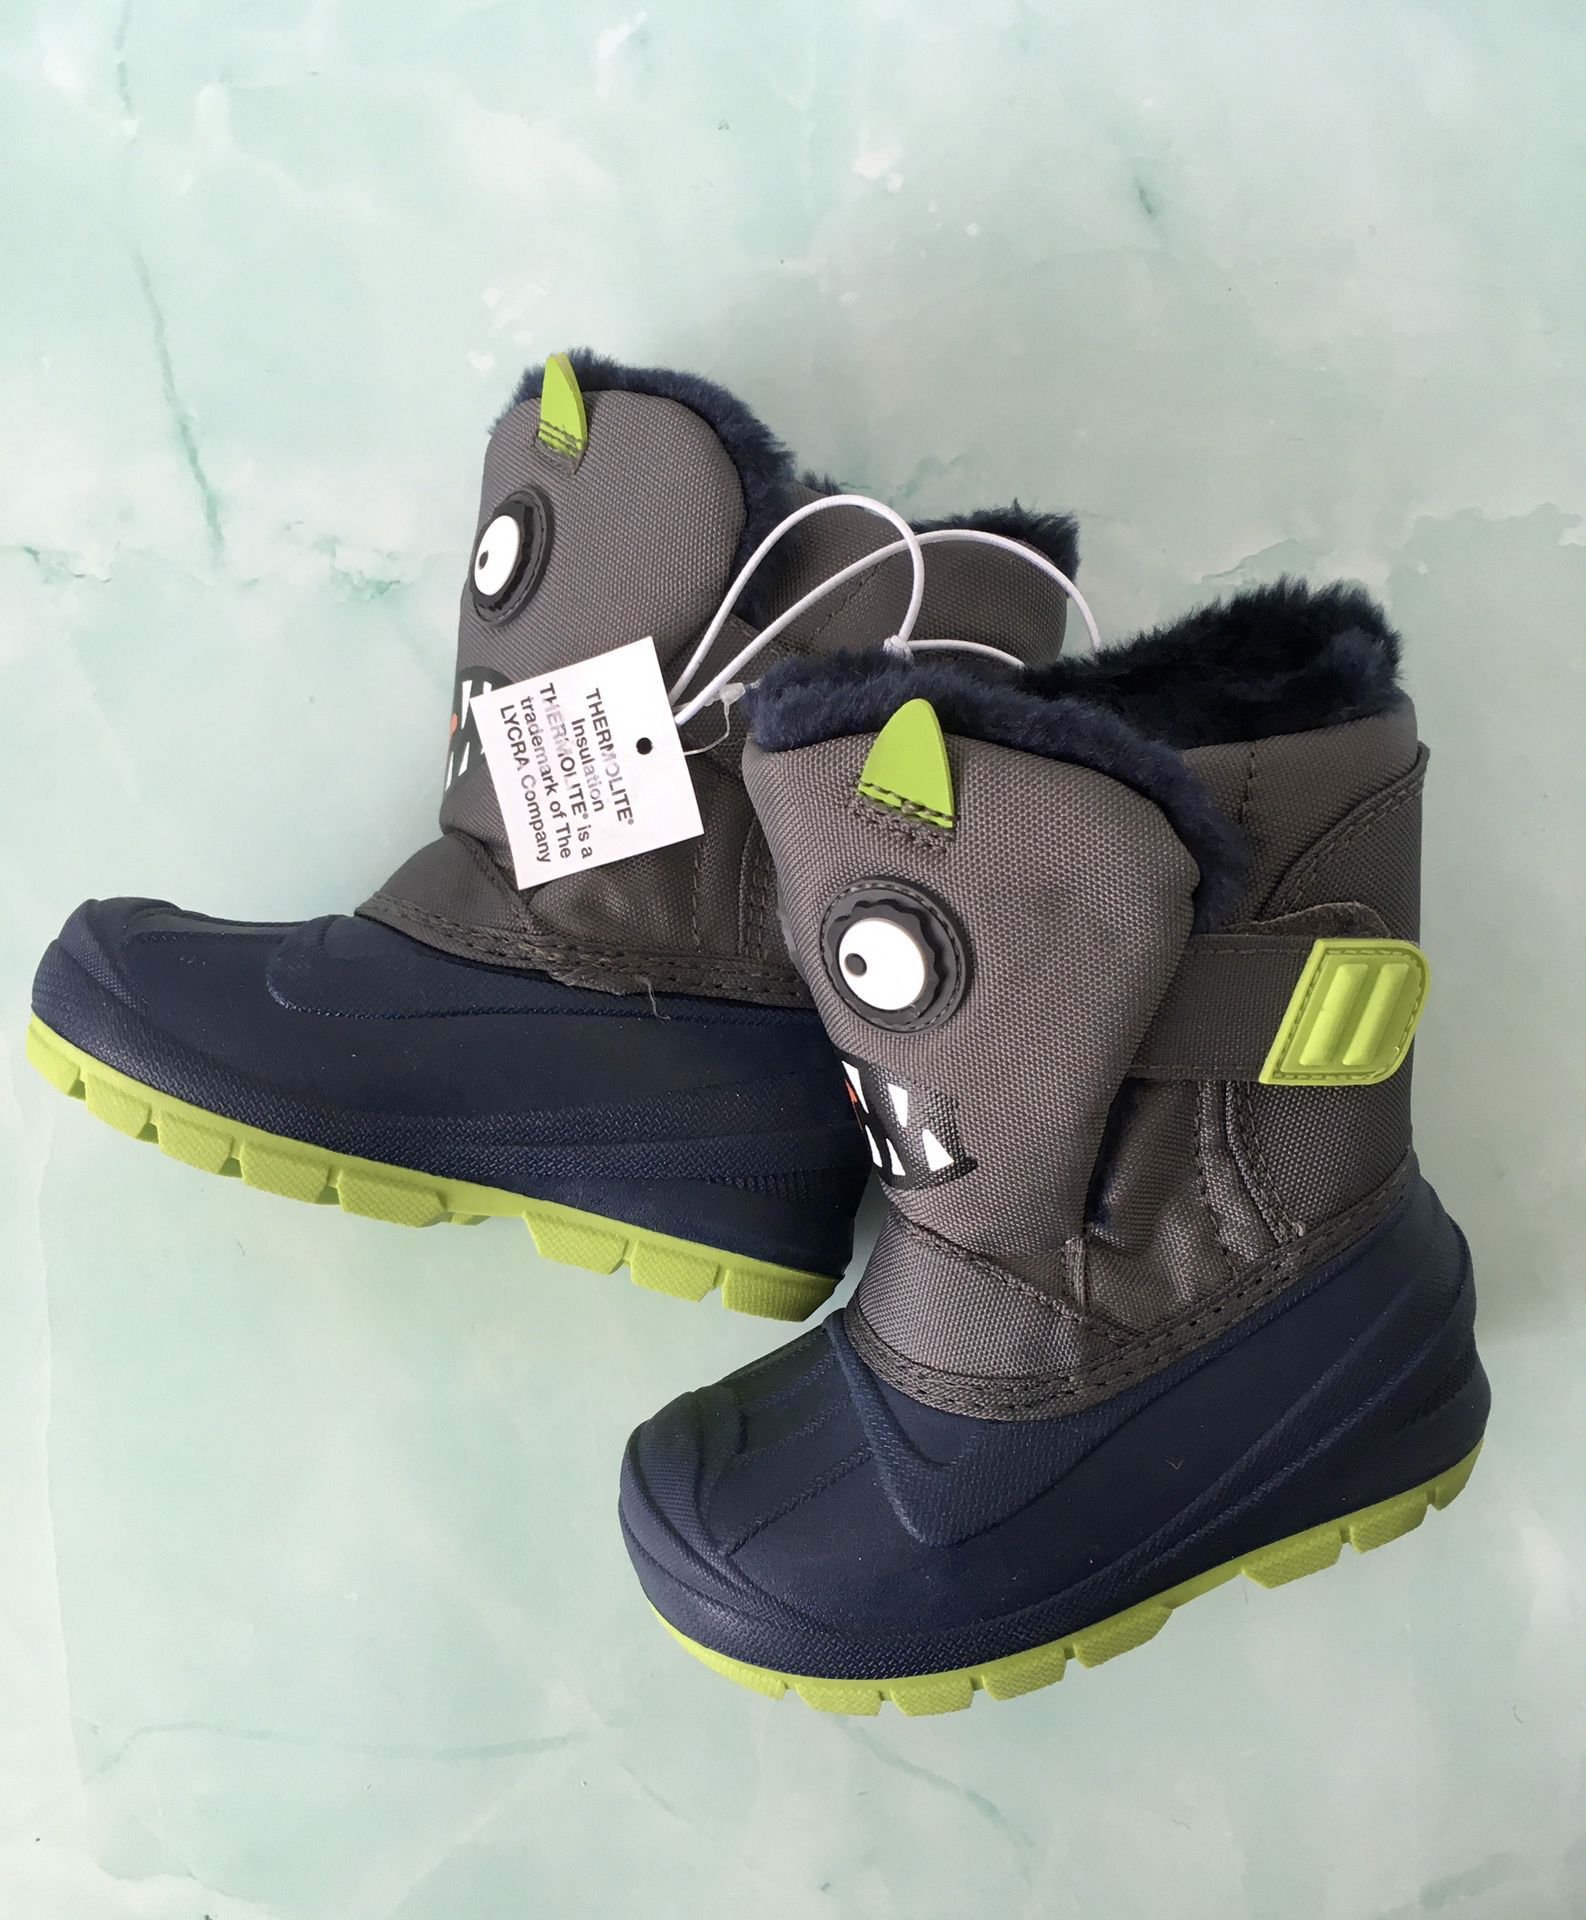 Toddler Snow Boots, Size 6